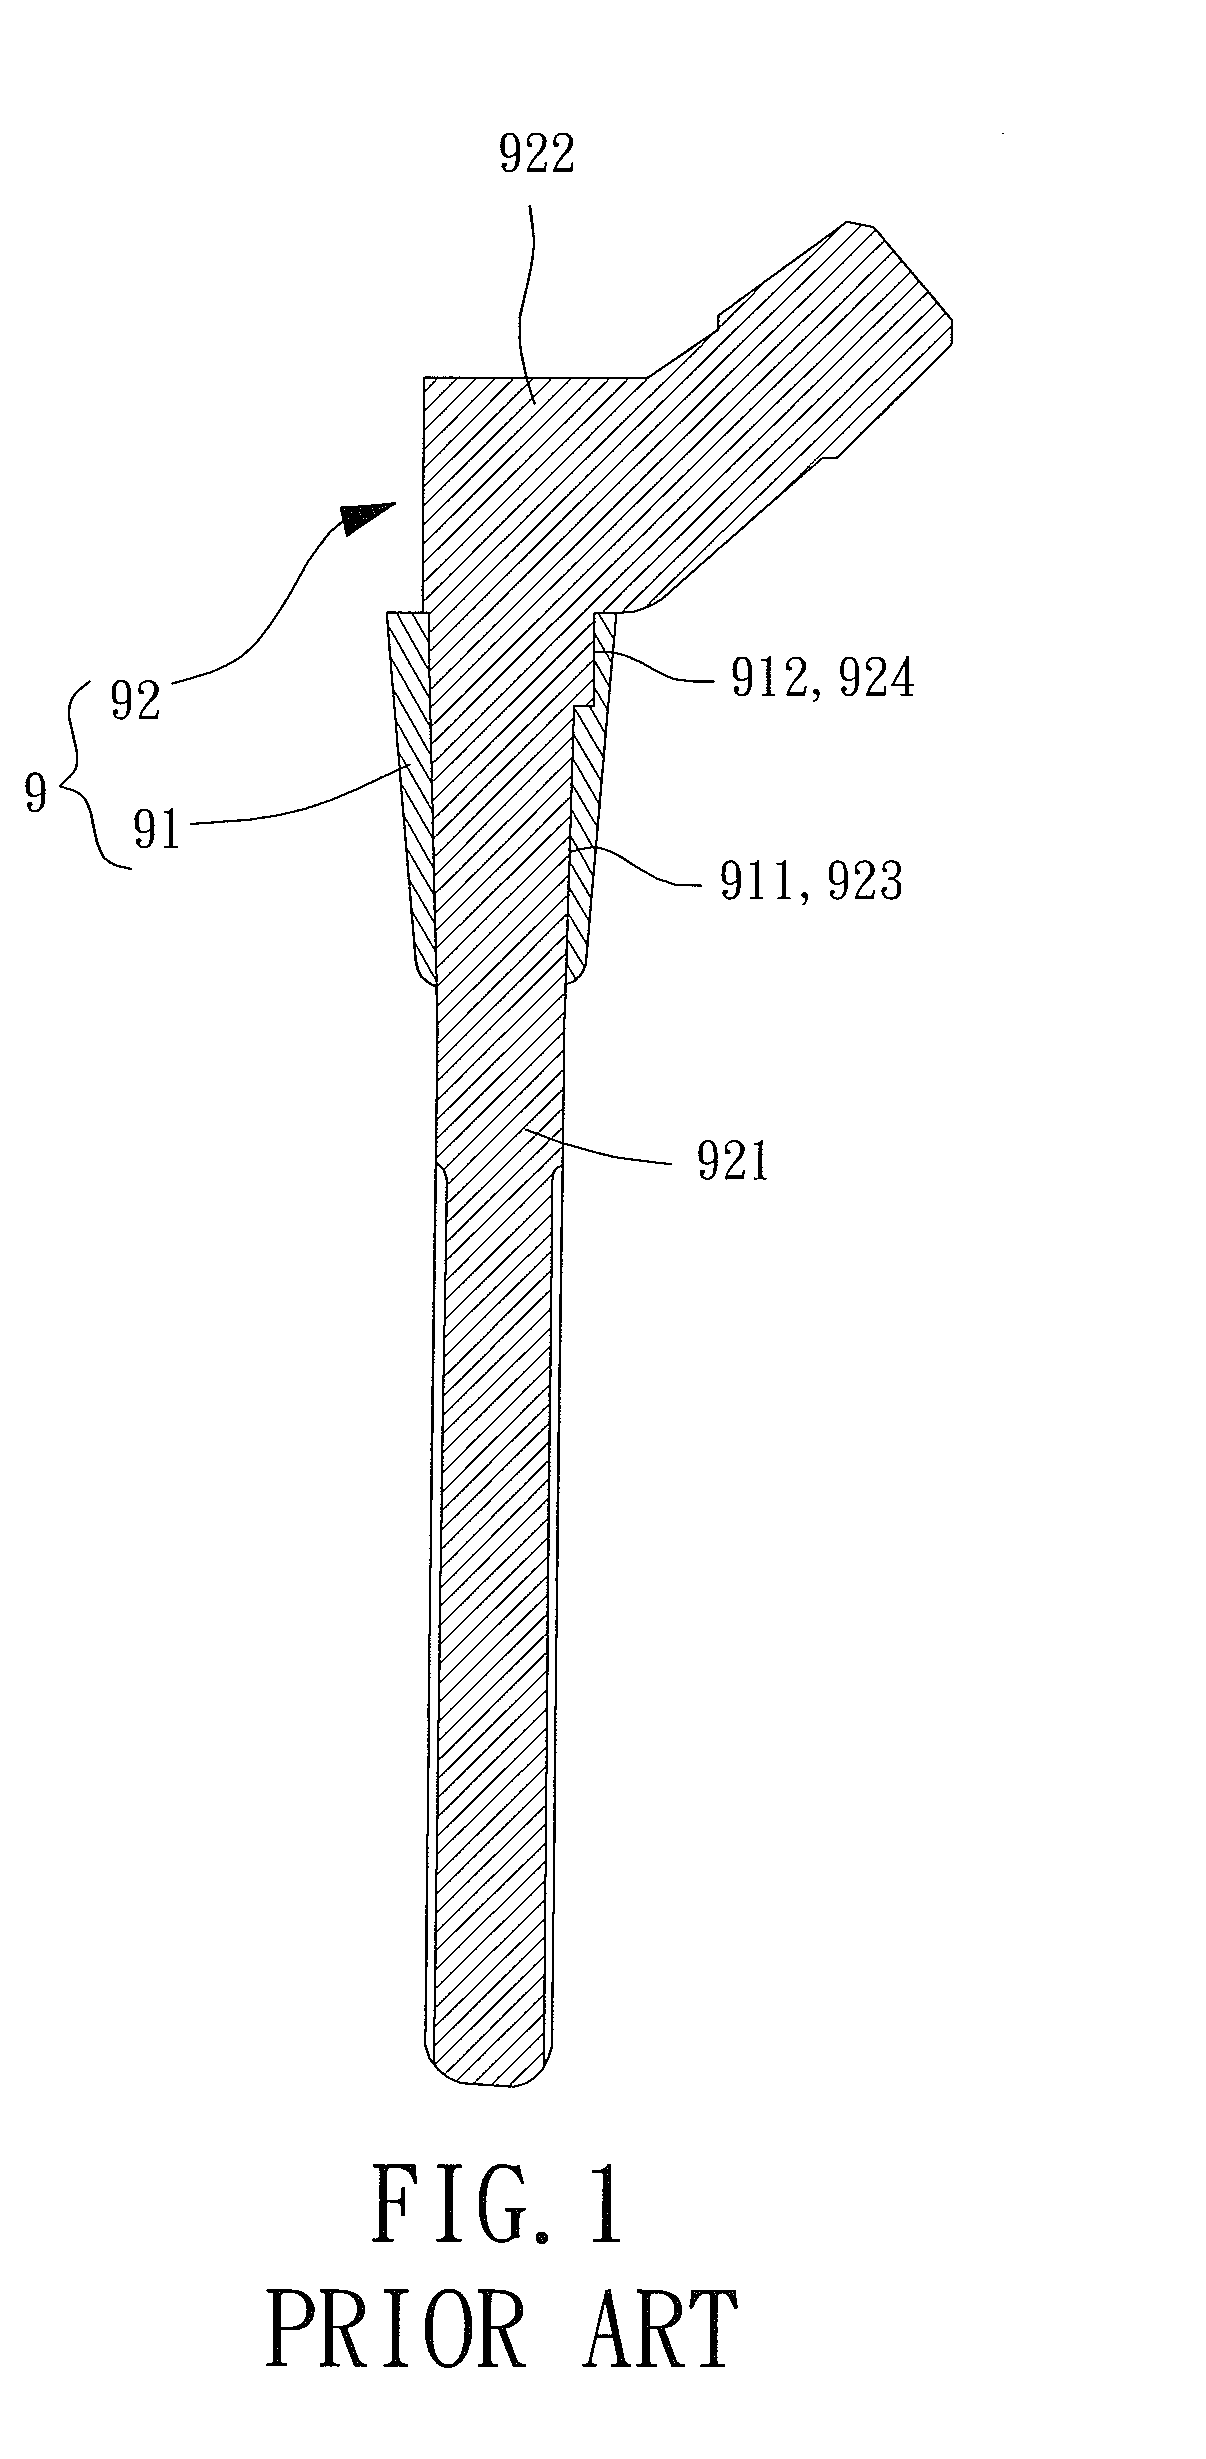 Femur Supporting Device